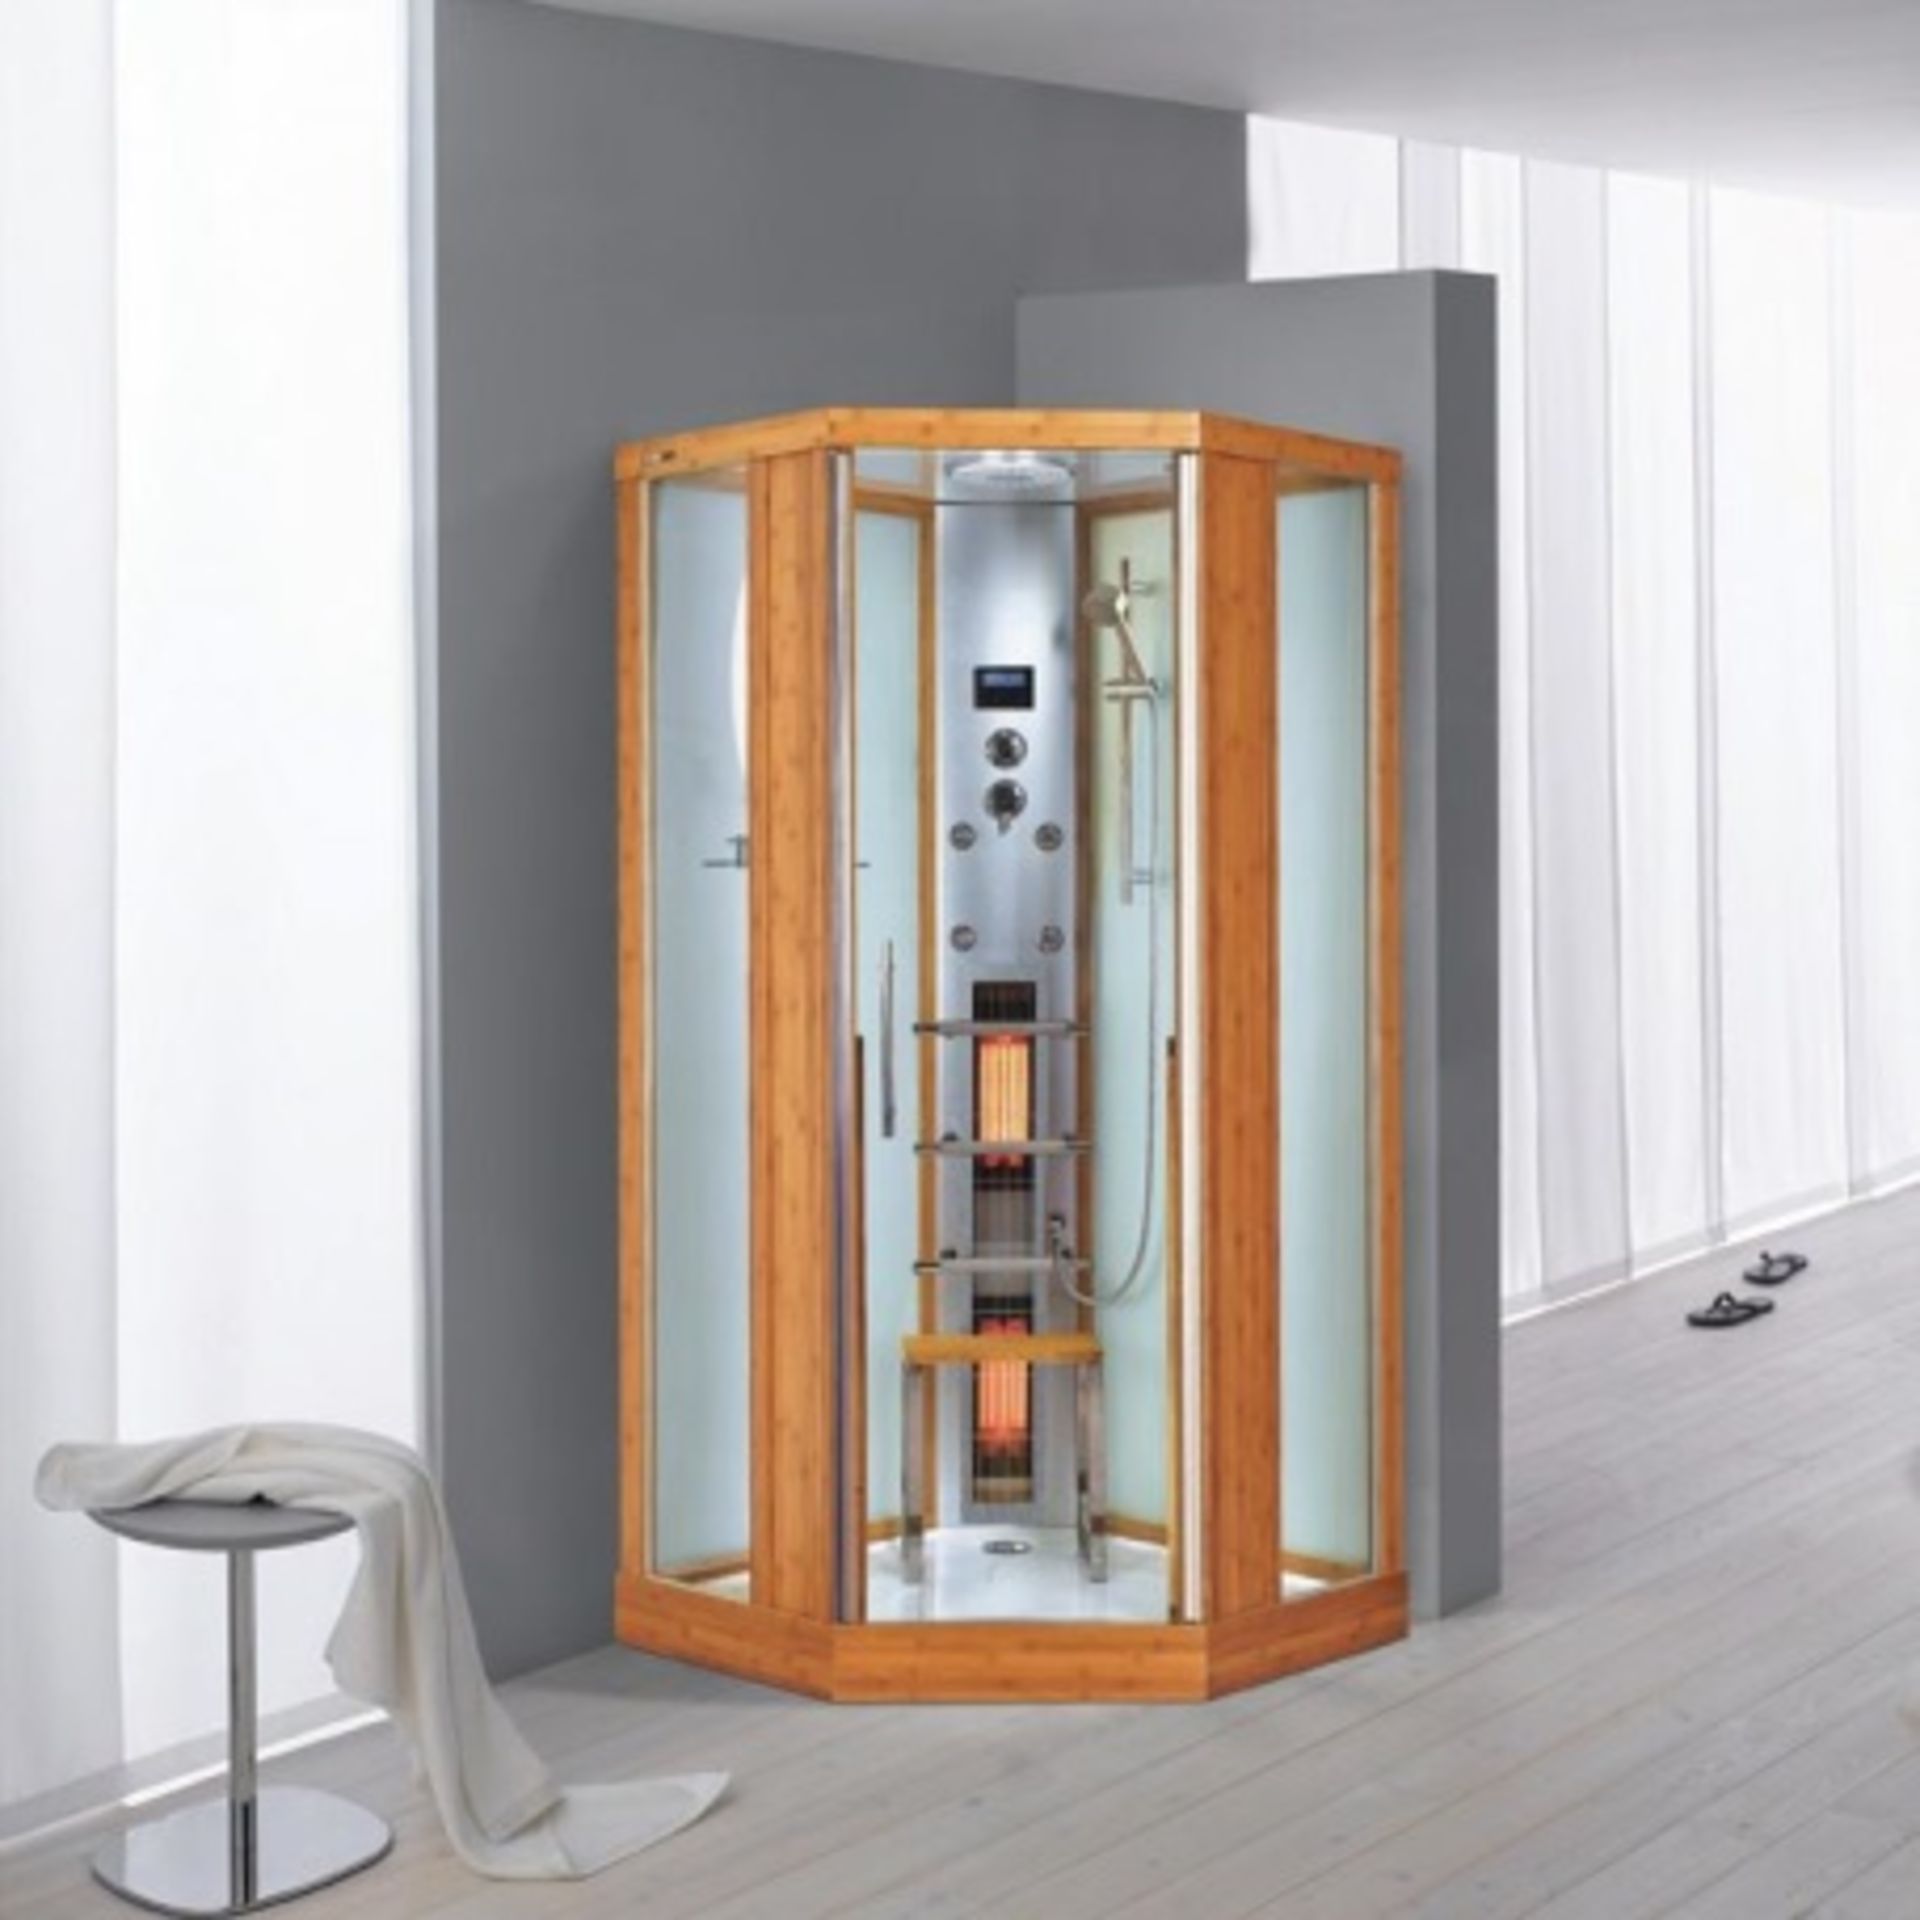 Solid Bamboo, Pentagonal ADS 261 solid bamboo steam shower and infrared sauna, amazing 3 in 1